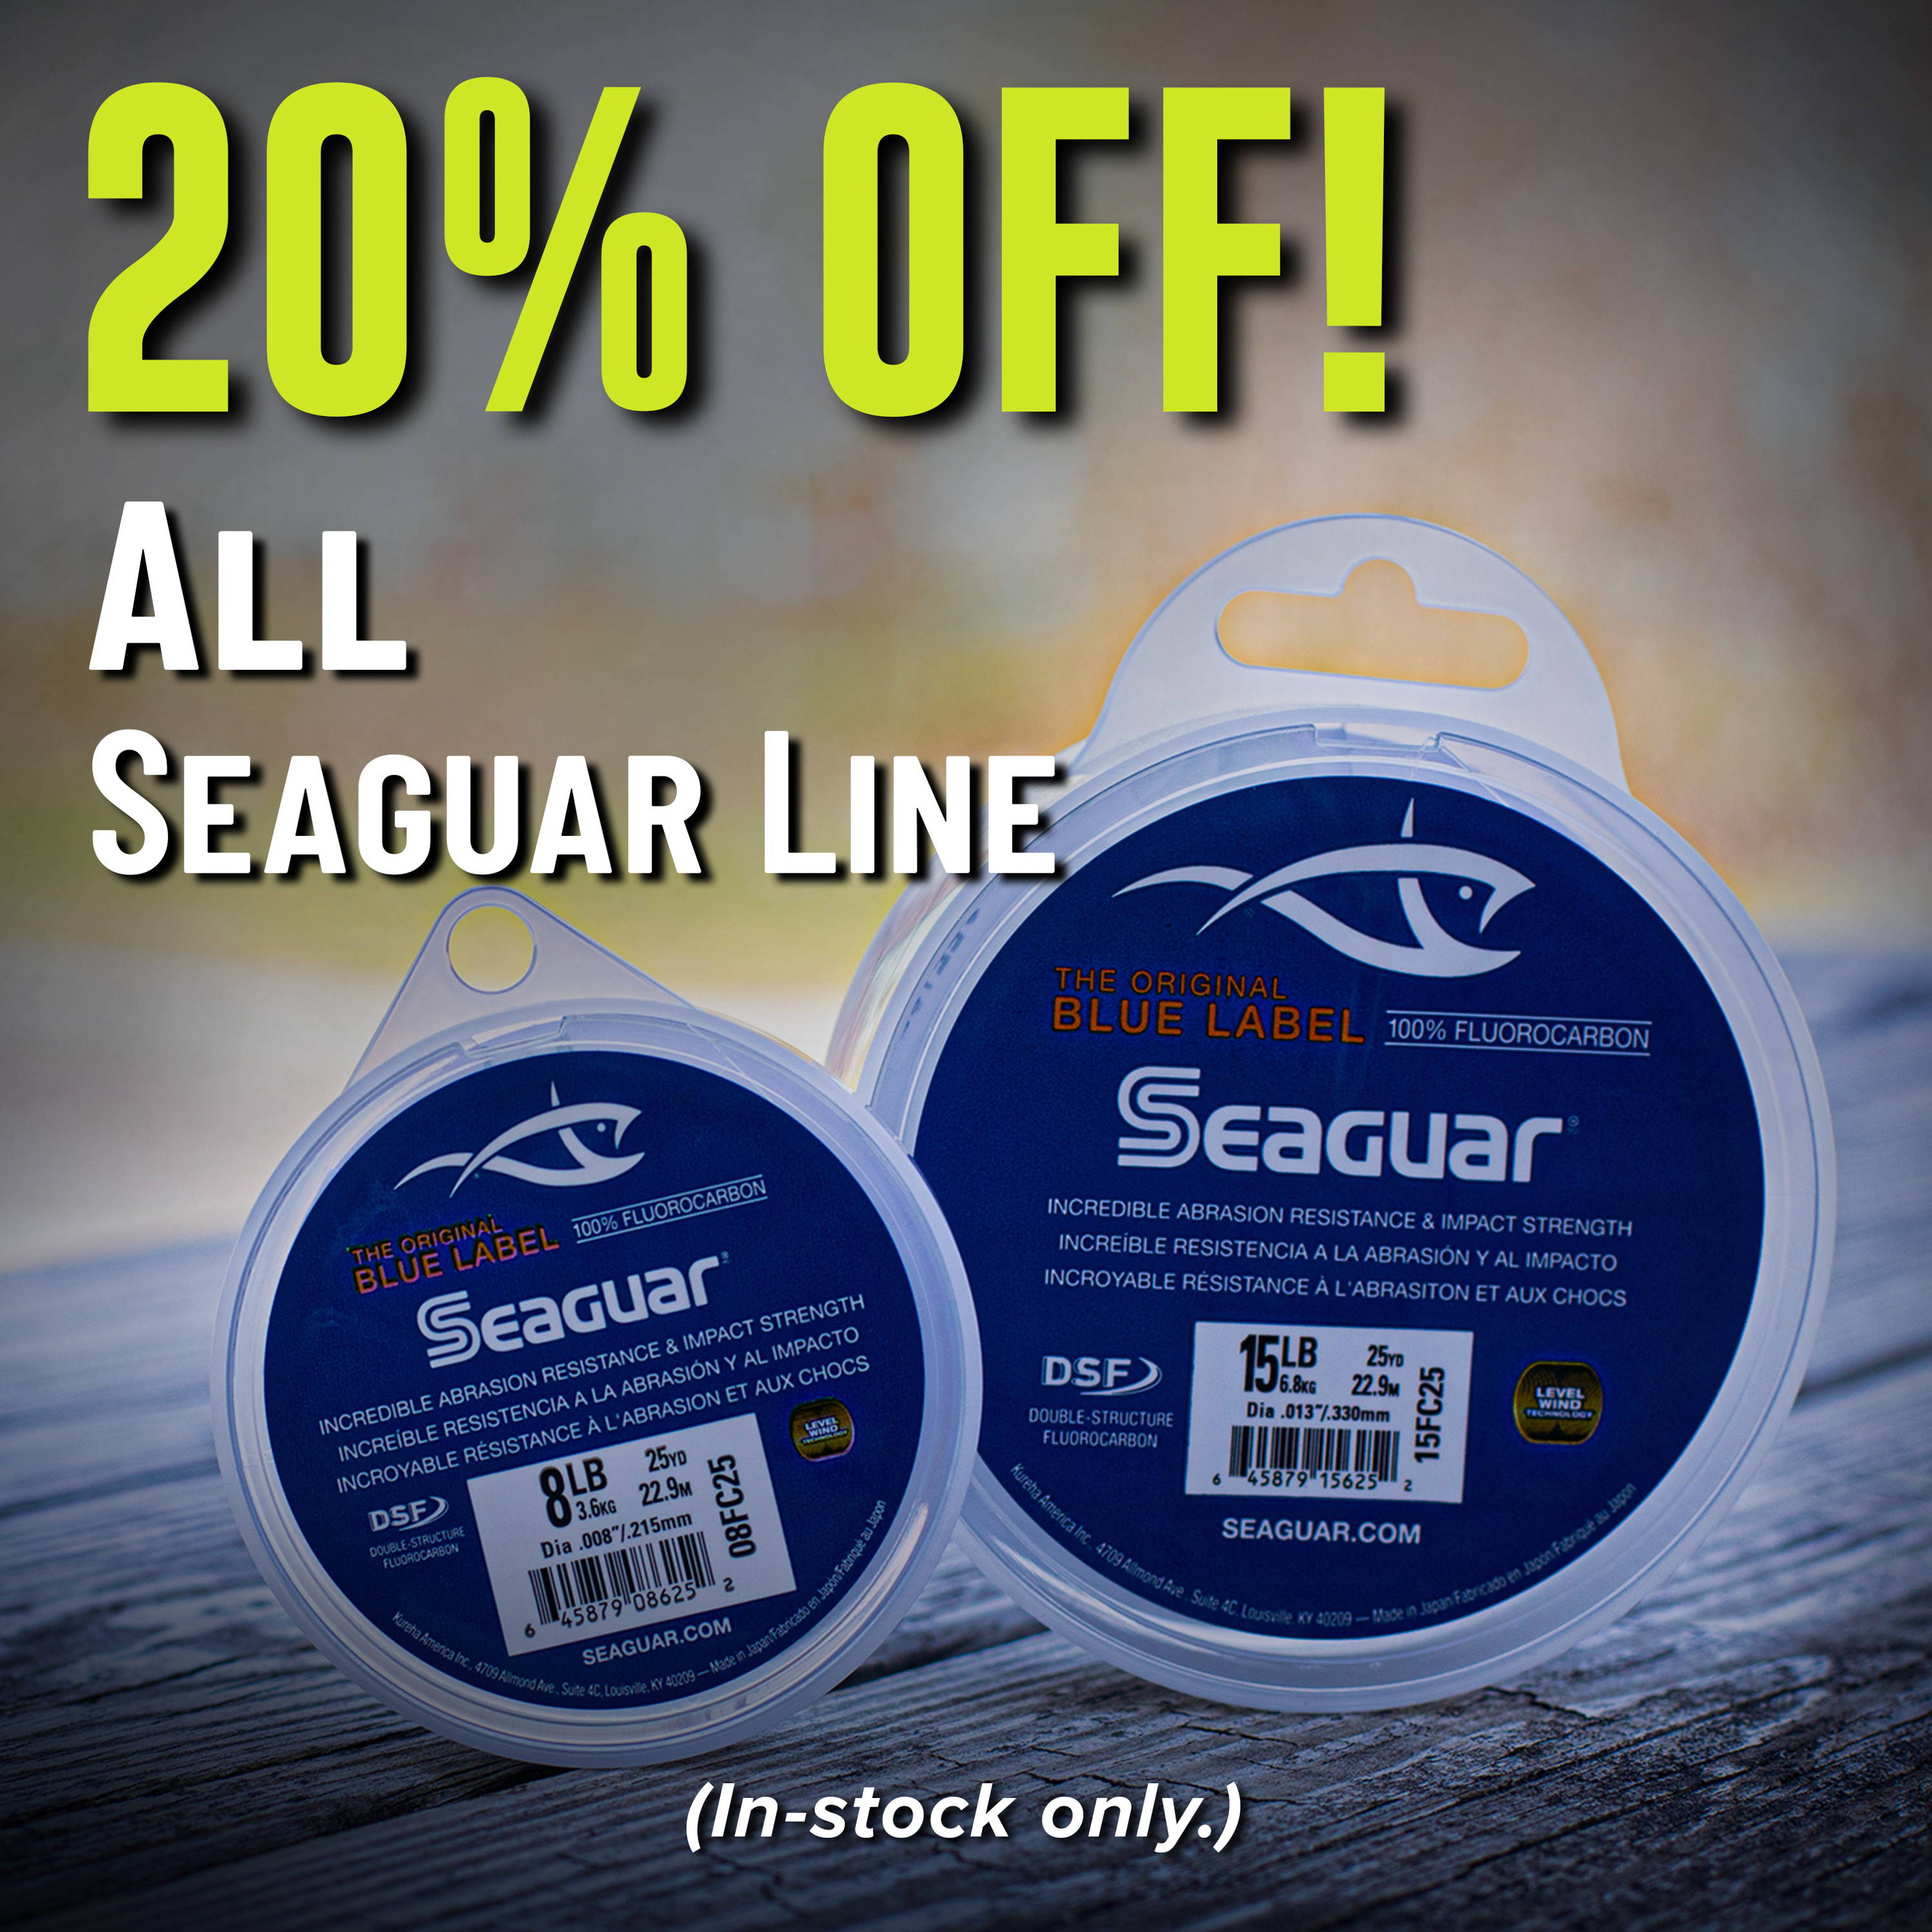 20% Off! All Seaguar Line (In-stock only.)